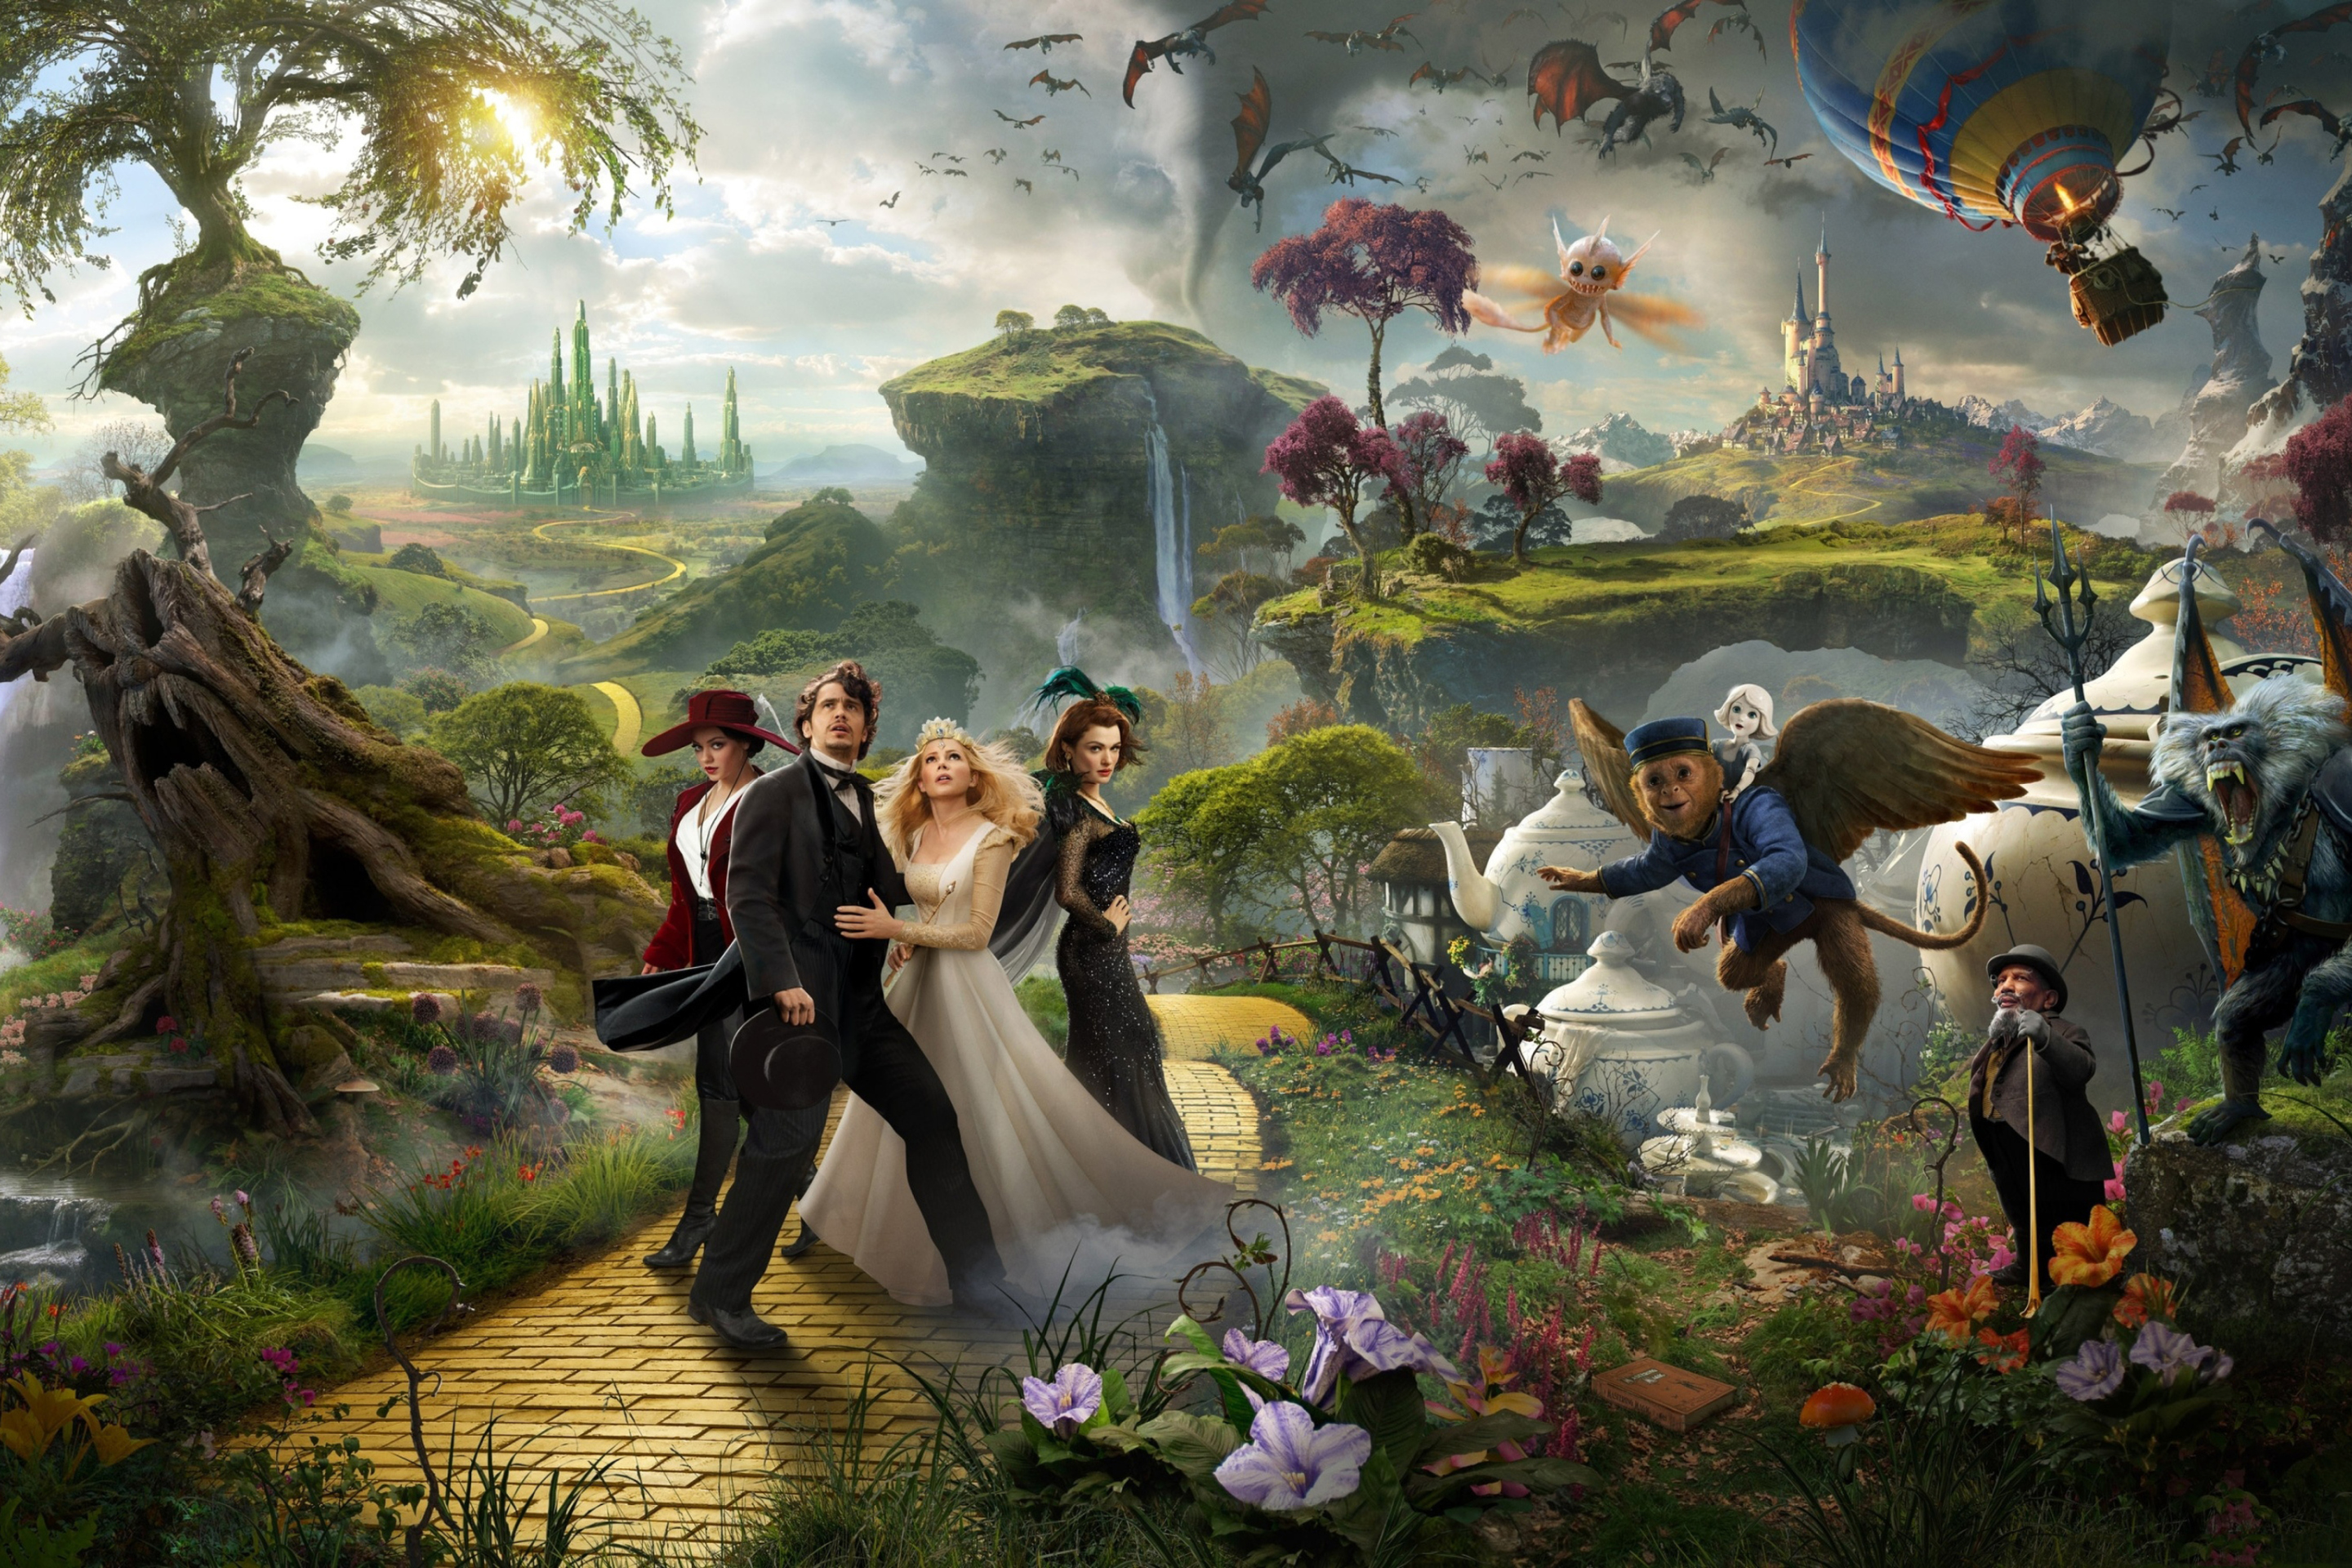 Oz The Great And Powerful 2013 Movie wallpaper 2880x1920